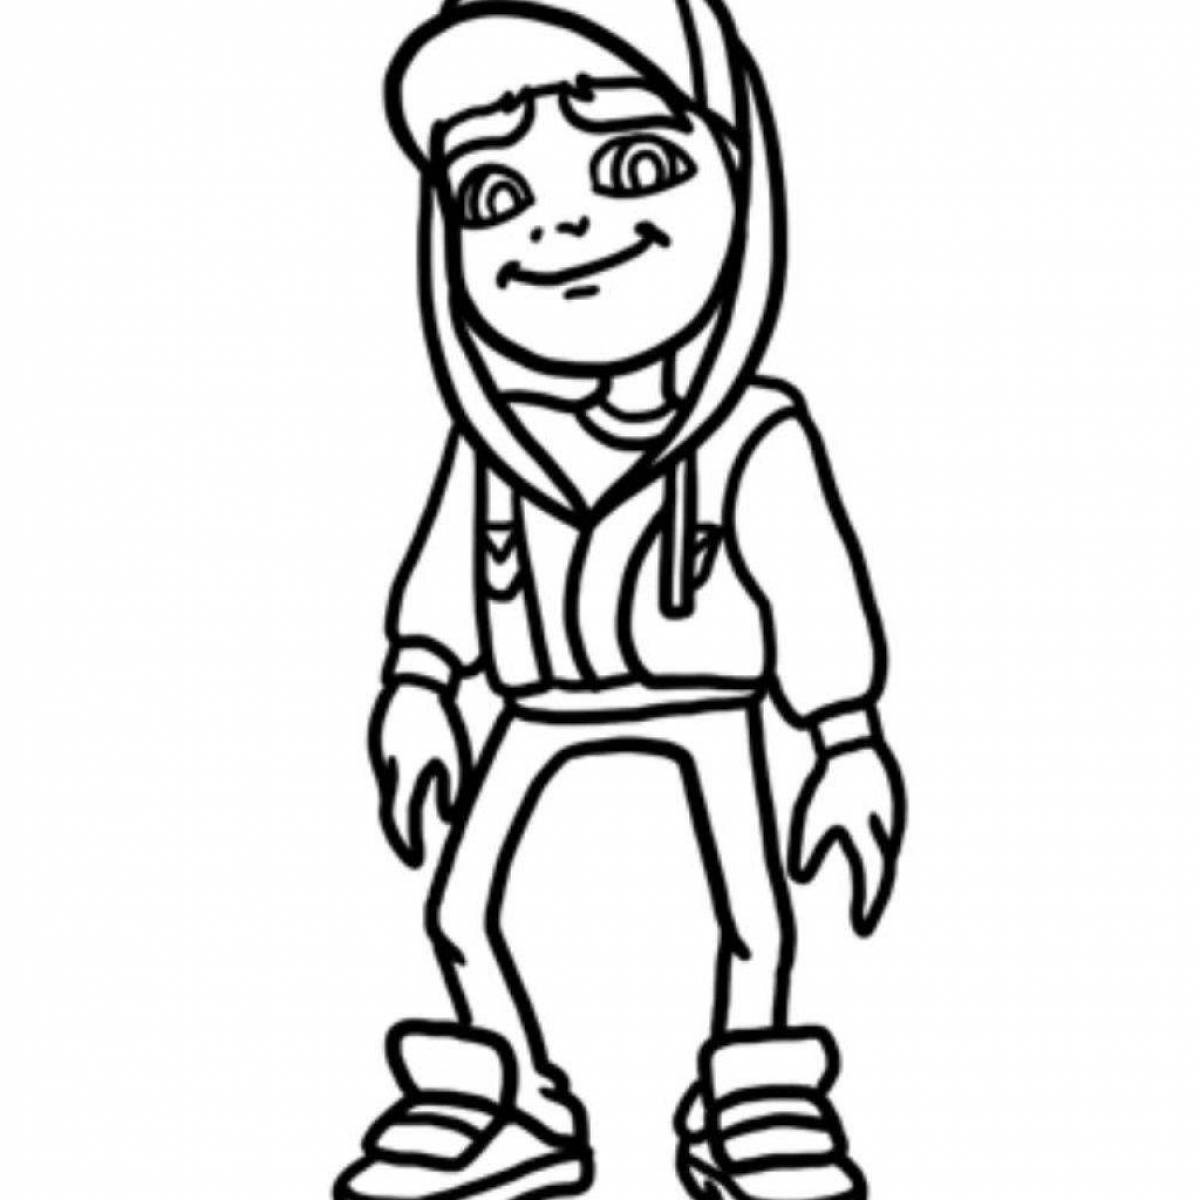 Exciting subway surf coloring book